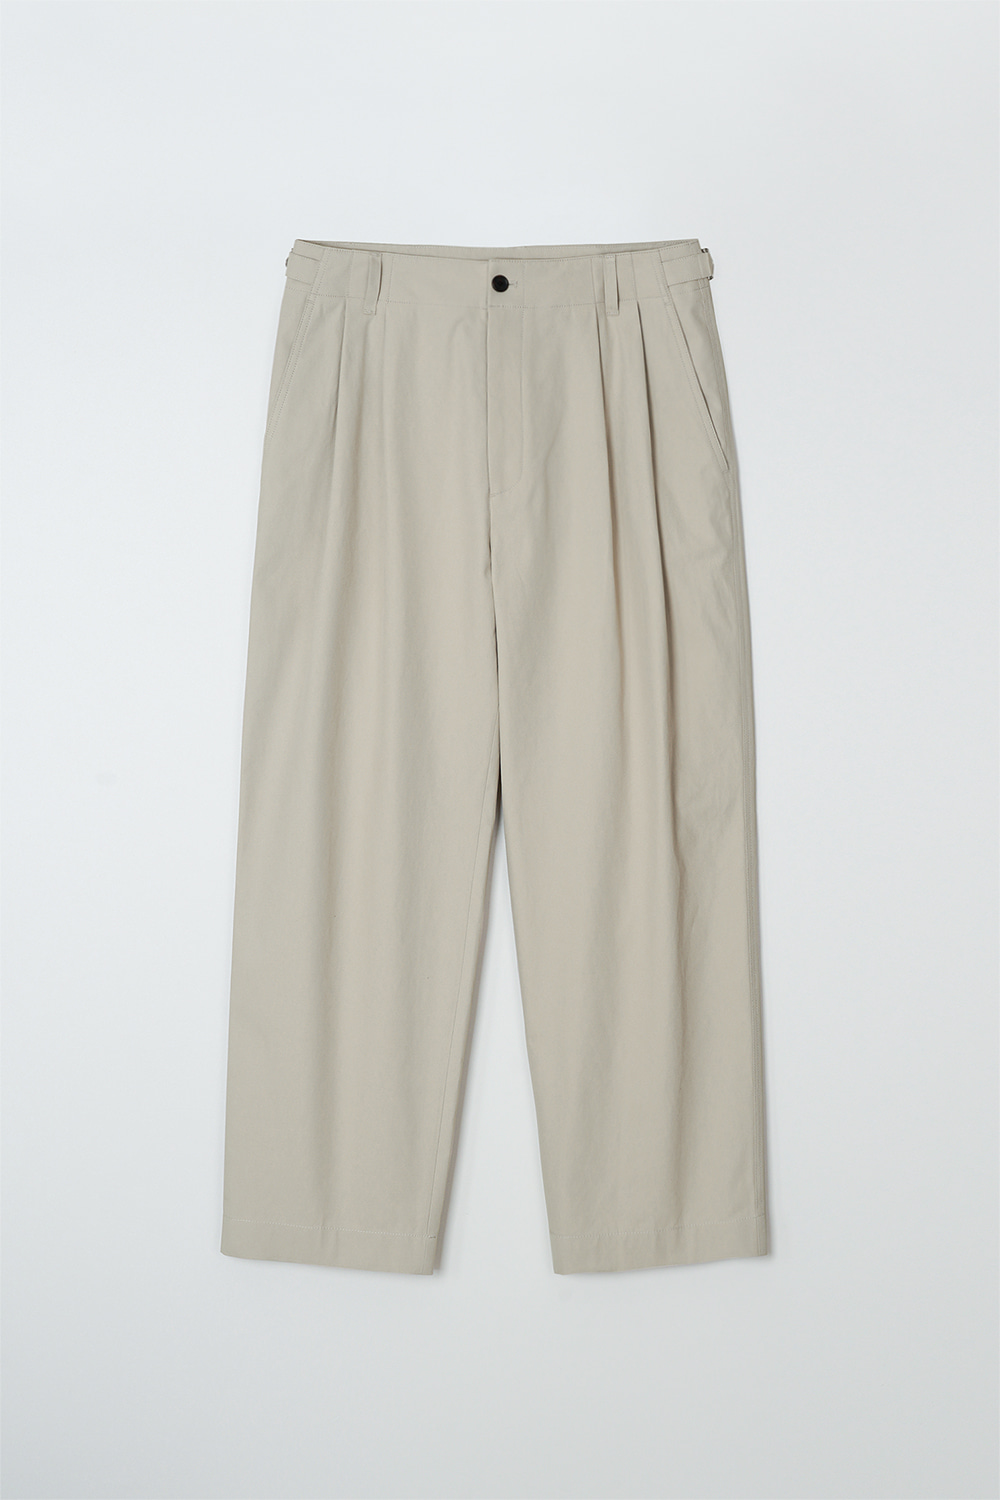 [4TH] TRAVELLER CHINO PANTS - SAND BEIGE